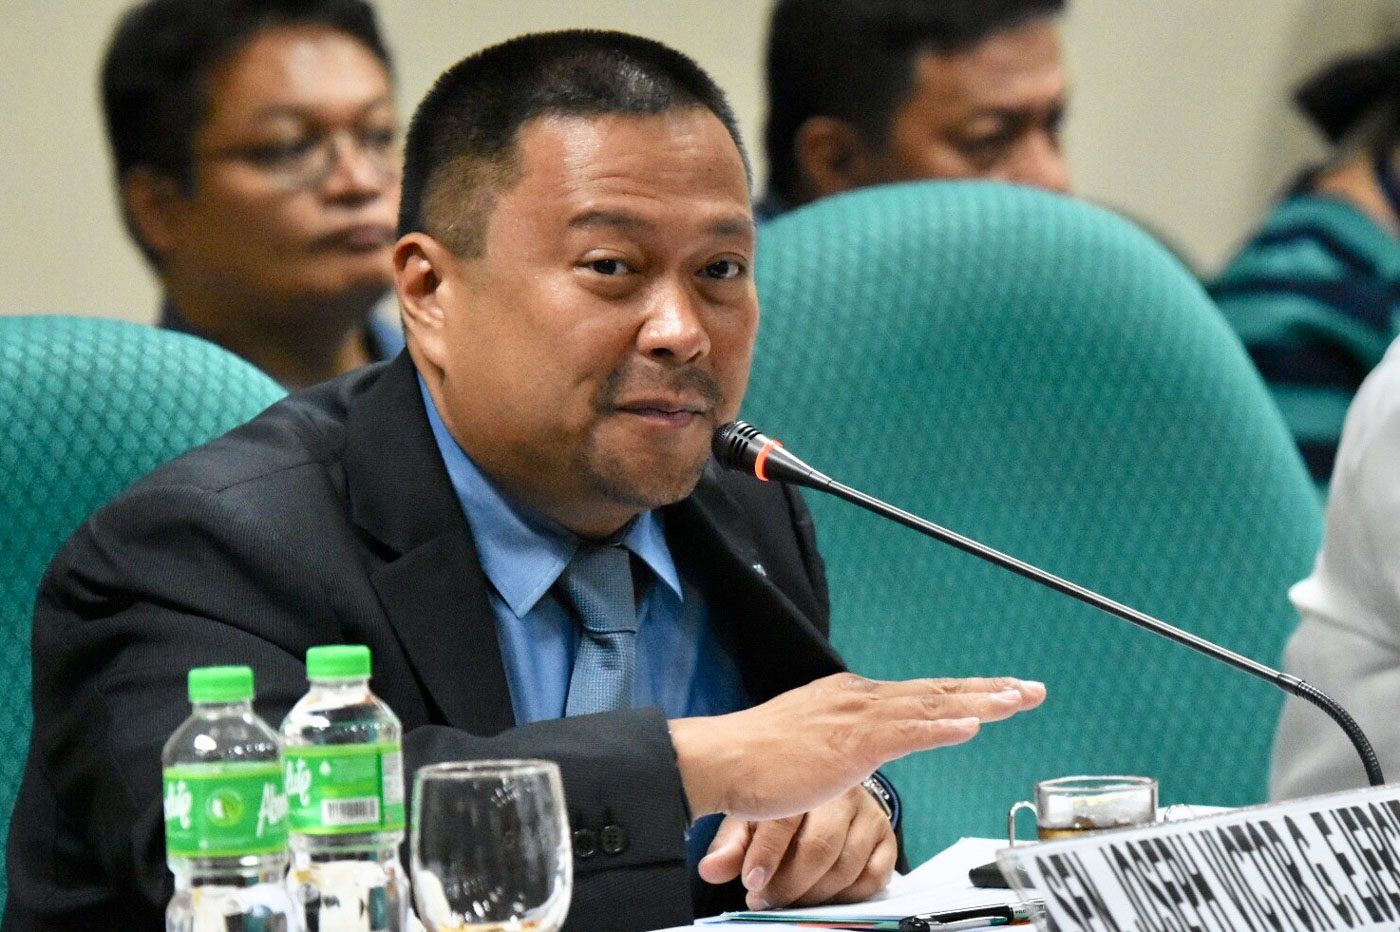 JV Ejercito on ratings dip: ‘Non-use of Estrada name working against me’